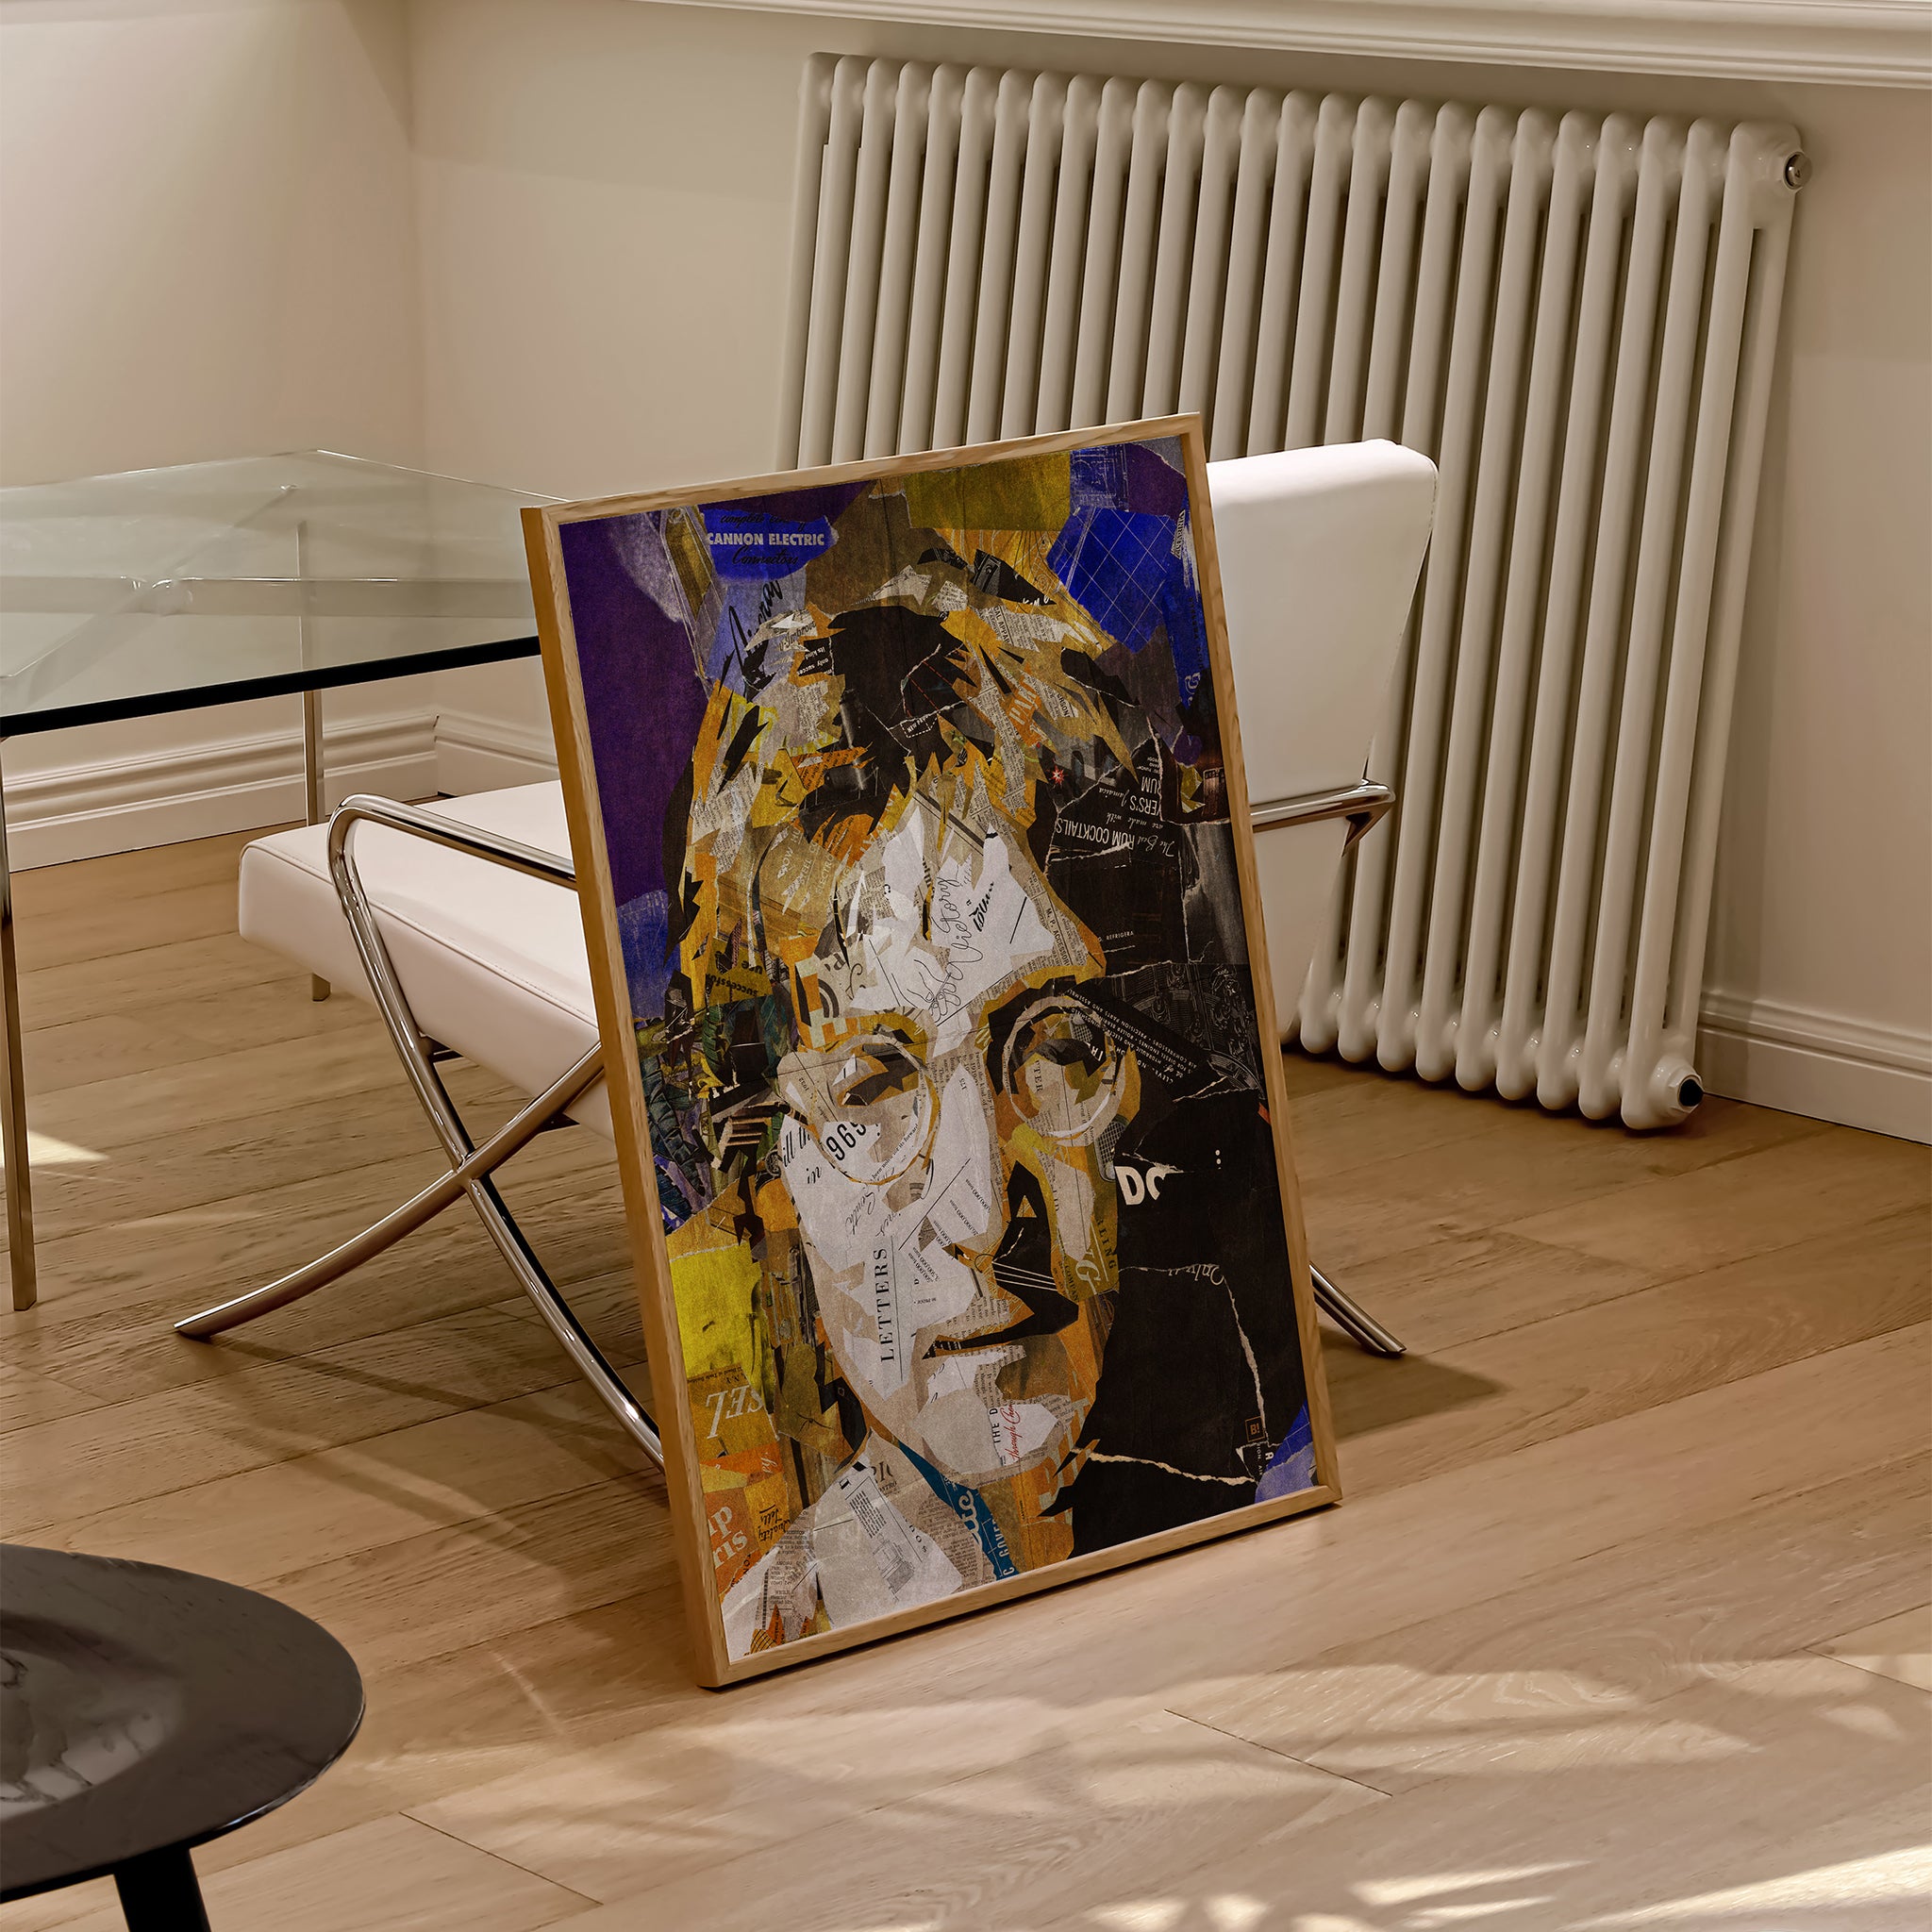 Be inspired by our iconic collage portrait art print of John Lennon. This artwork was printed using the giclée process on archival acid-free paper and is presented in a natural oak frame, capturing its timeless beauty in every detail.